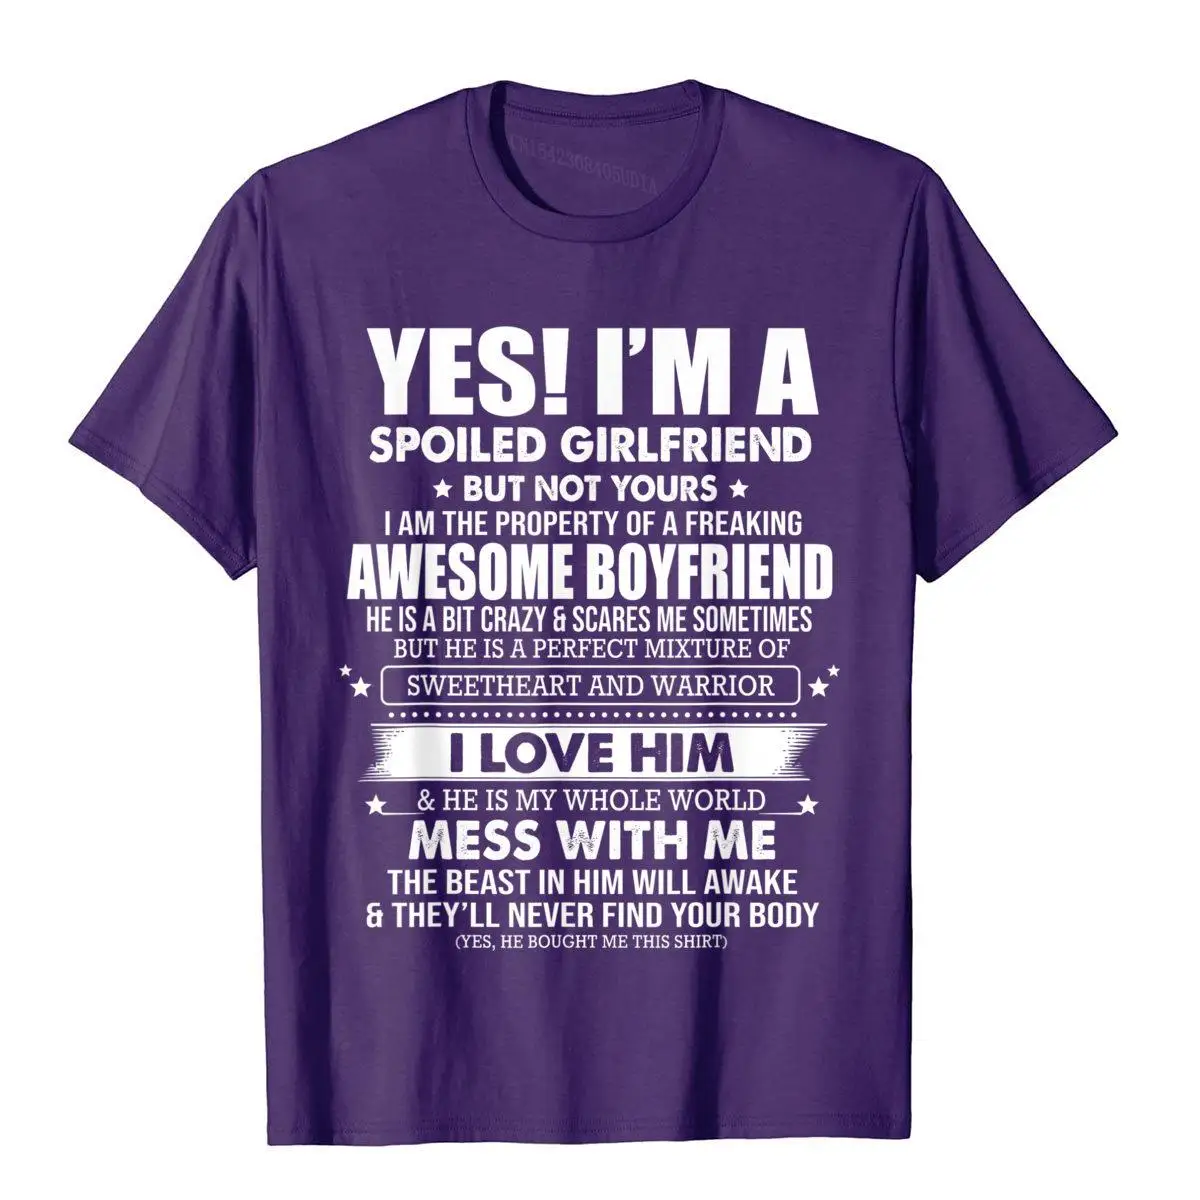 Yes I'm a spoiled girlfriend of a freaking awesome boyfriend T-Shirt__B5537purple